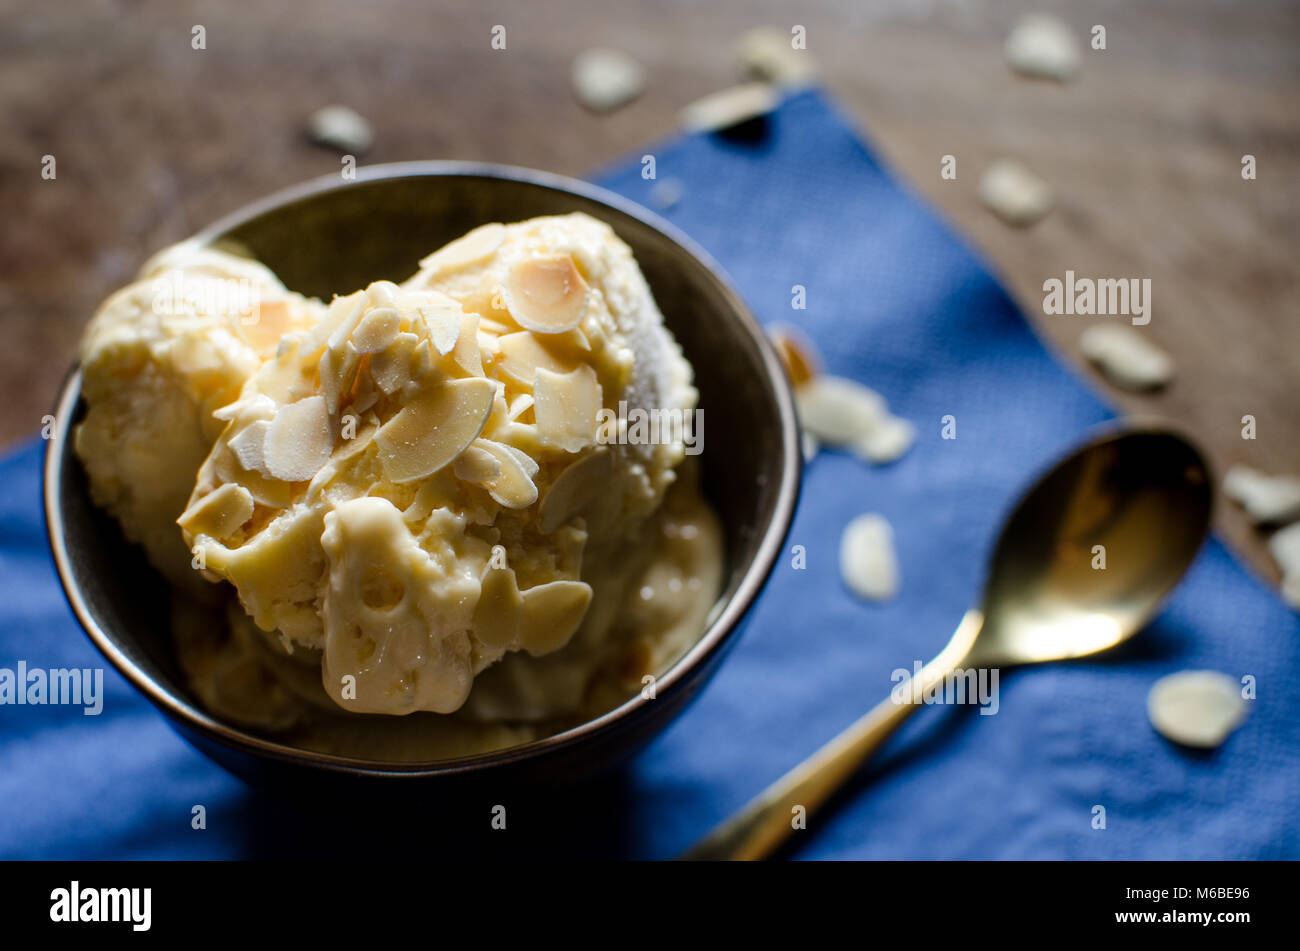 Passion fruit Semifreddo with almonds on a dark background on a wooden board and a dark blue paper napkin Stock Photo